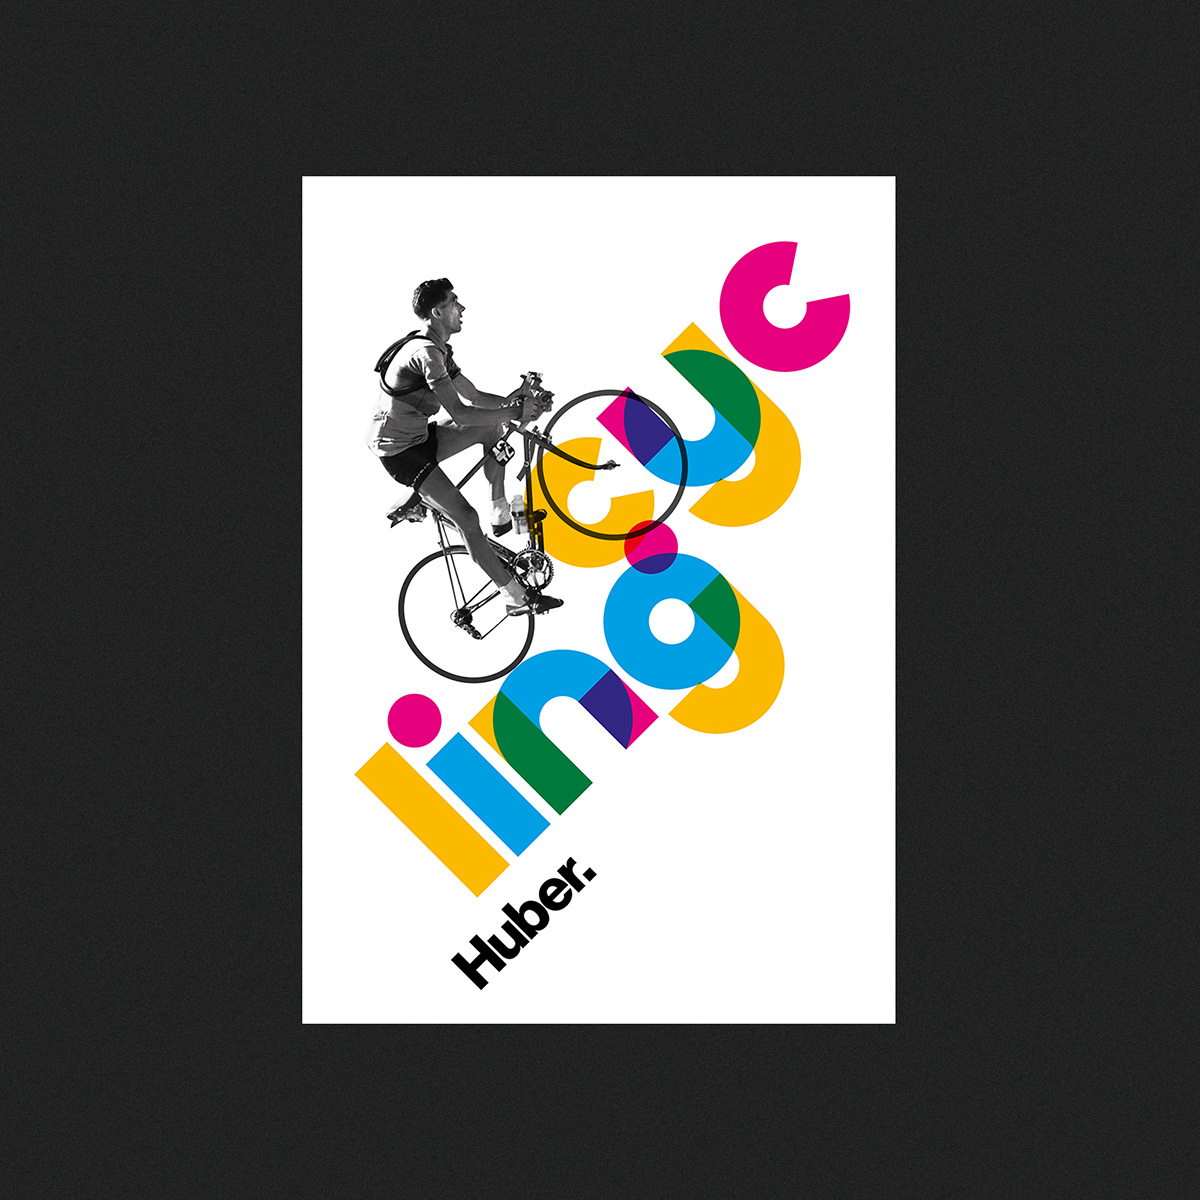 colors Exhibition  font free letter poster posters swiss Typeface